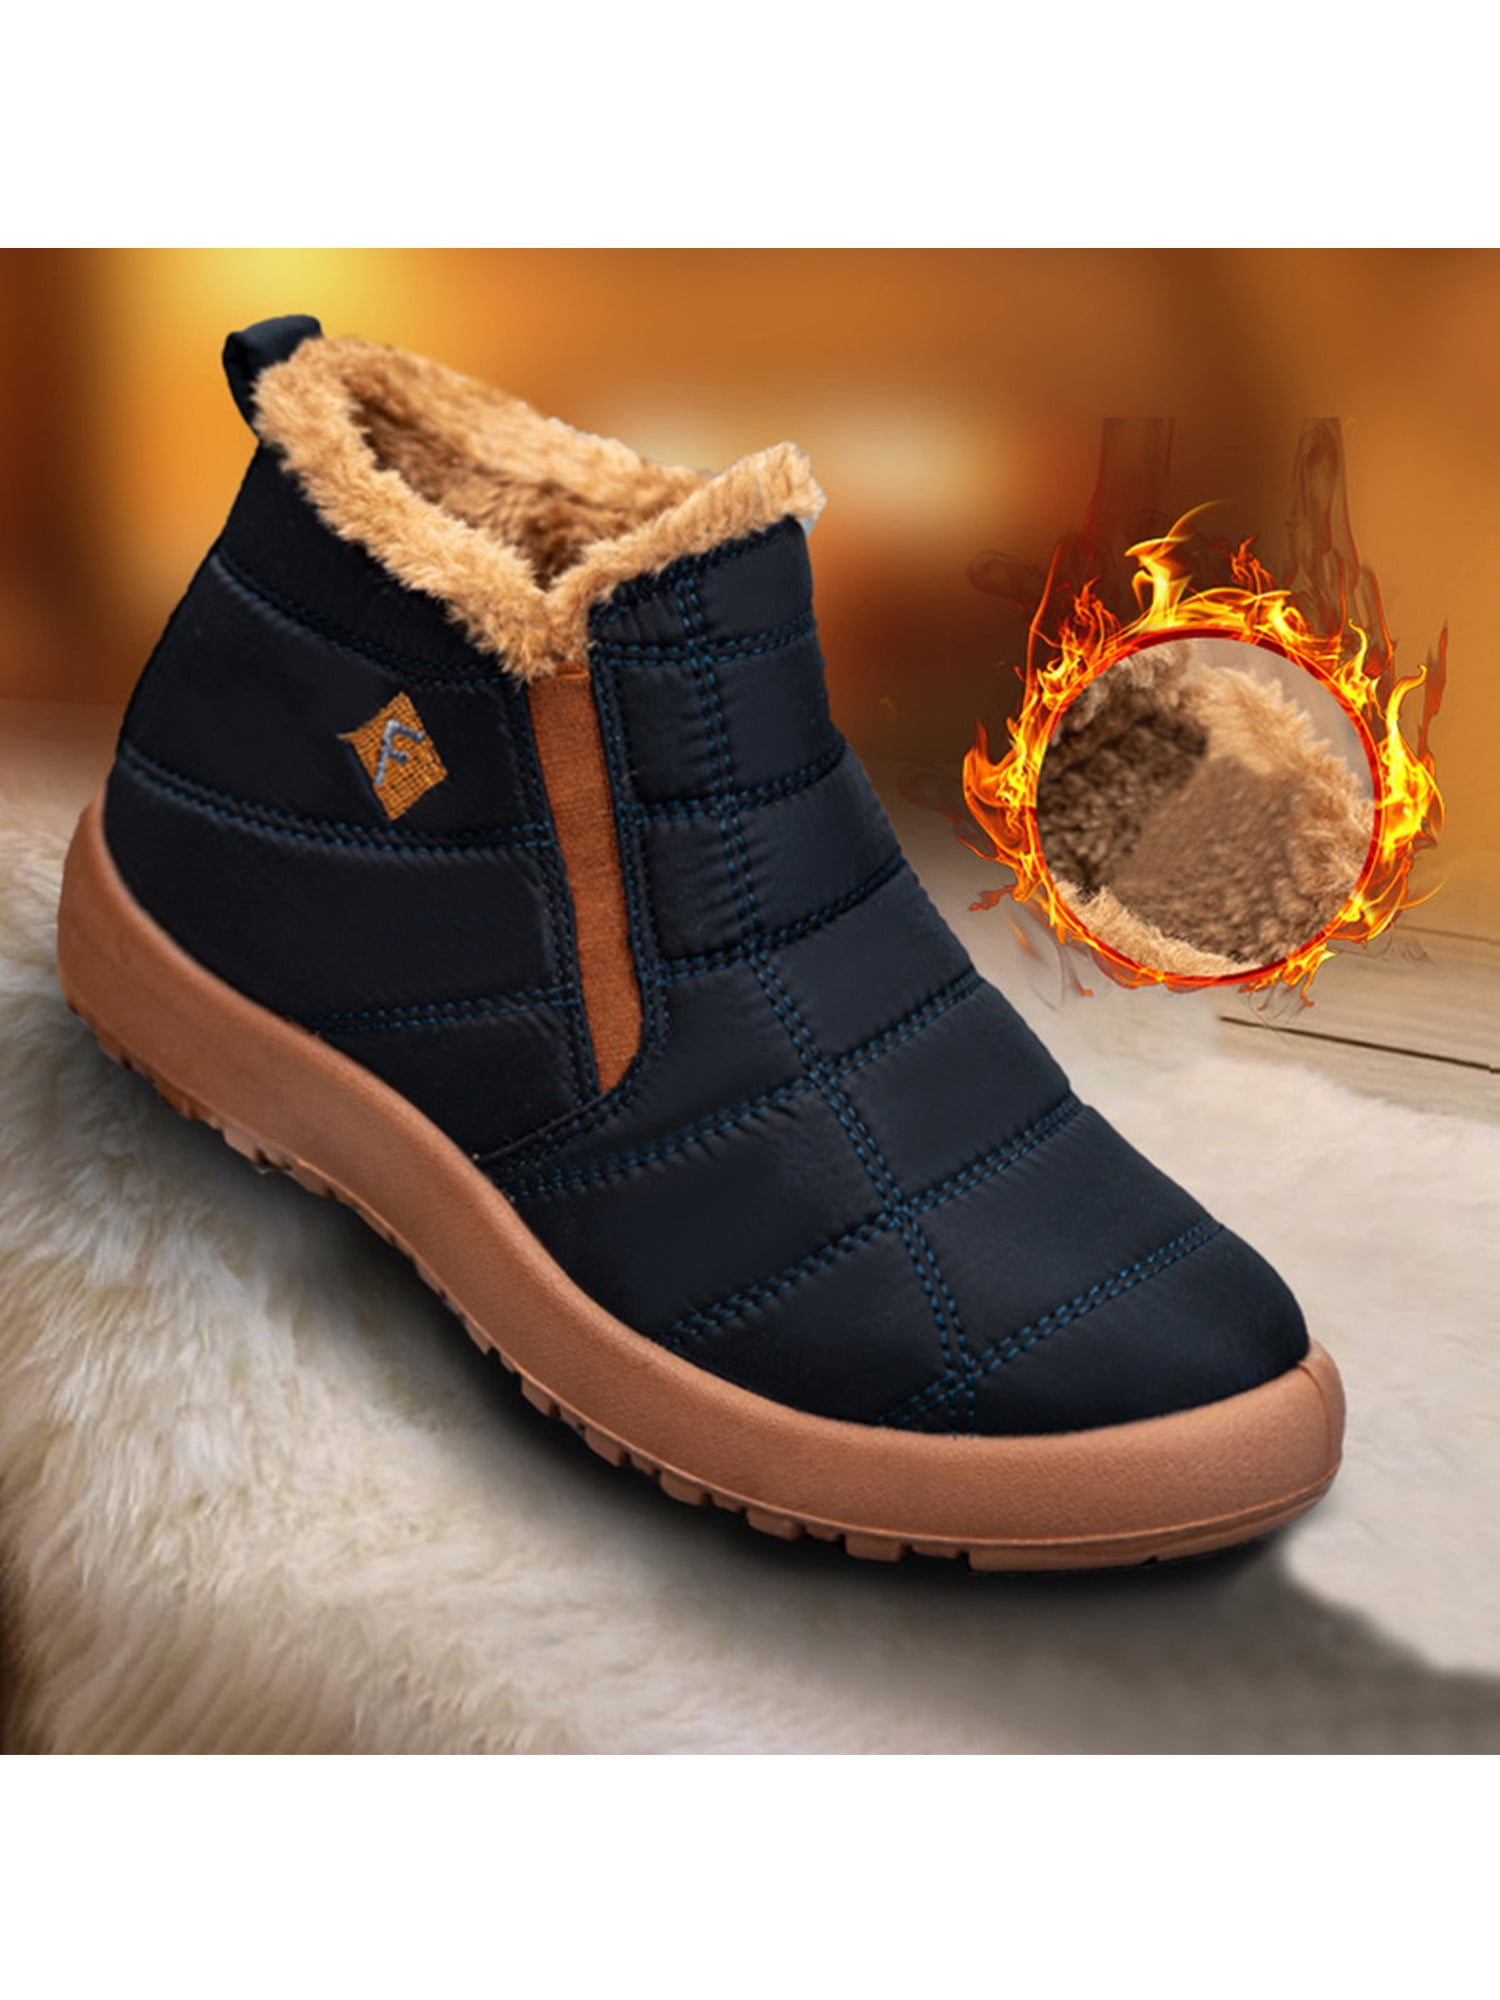 Men Women Leather Ankle Boots Outdoor Winter Snow Boot Unisex Waterproof Shoes @